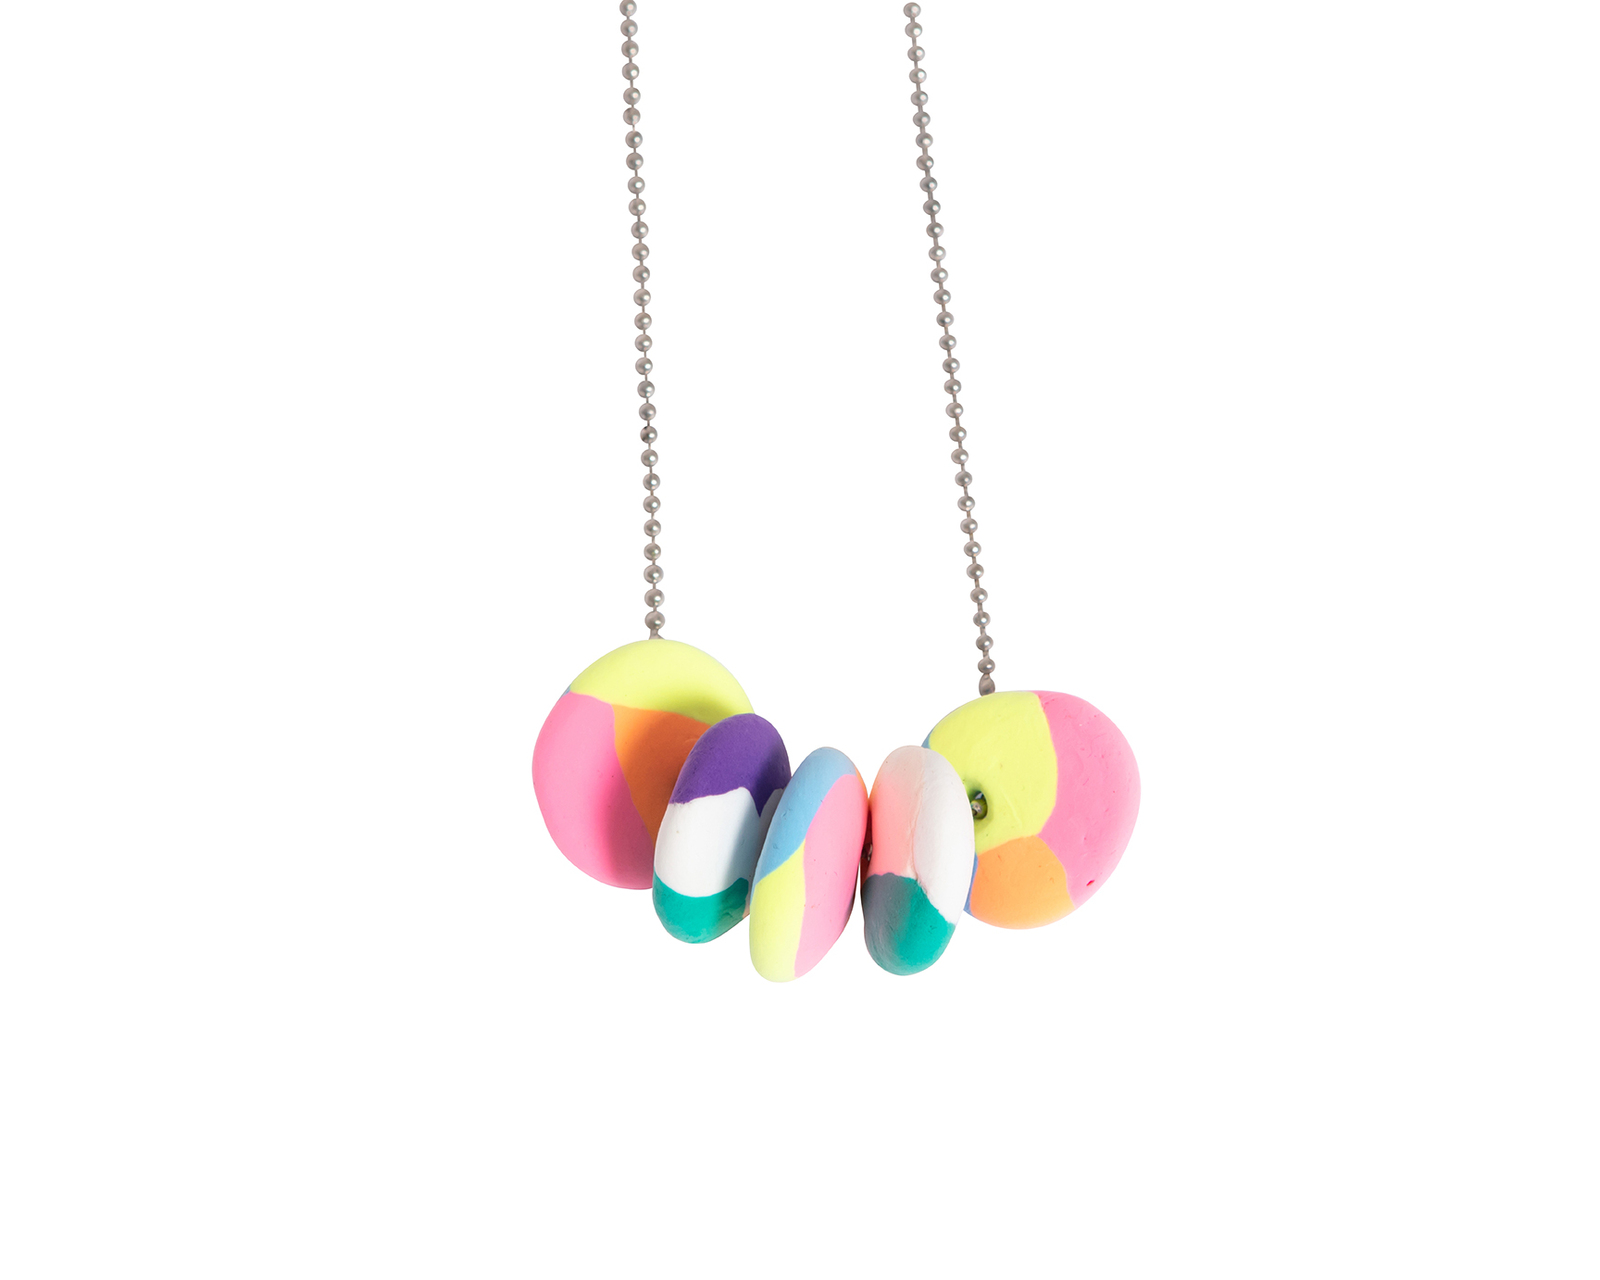 Jewellery Design Kit - Super Clay Necklaces